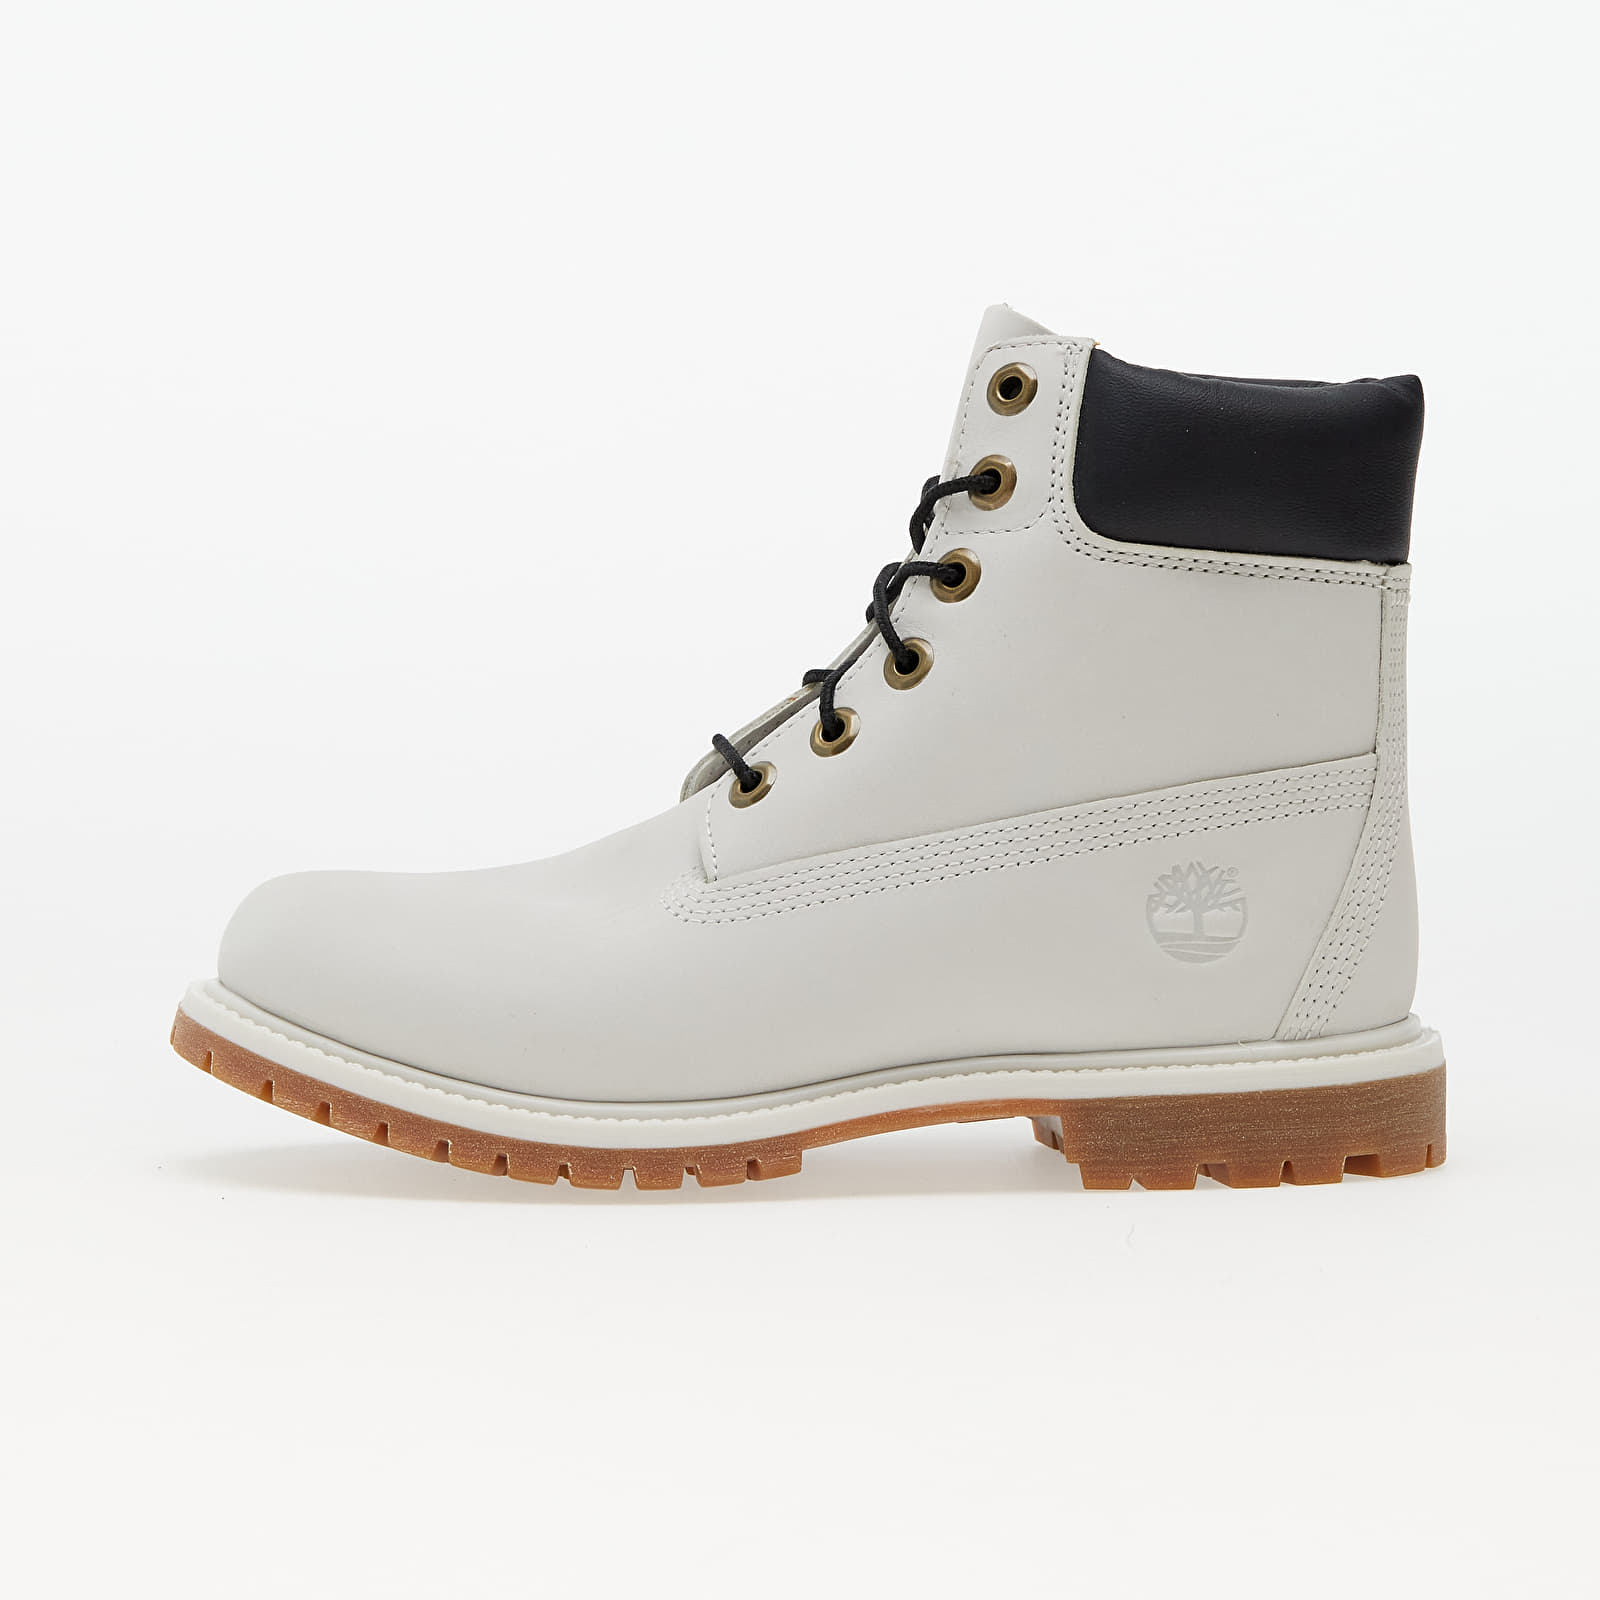 Timberland - 6 inch lace up waterproof boot grey